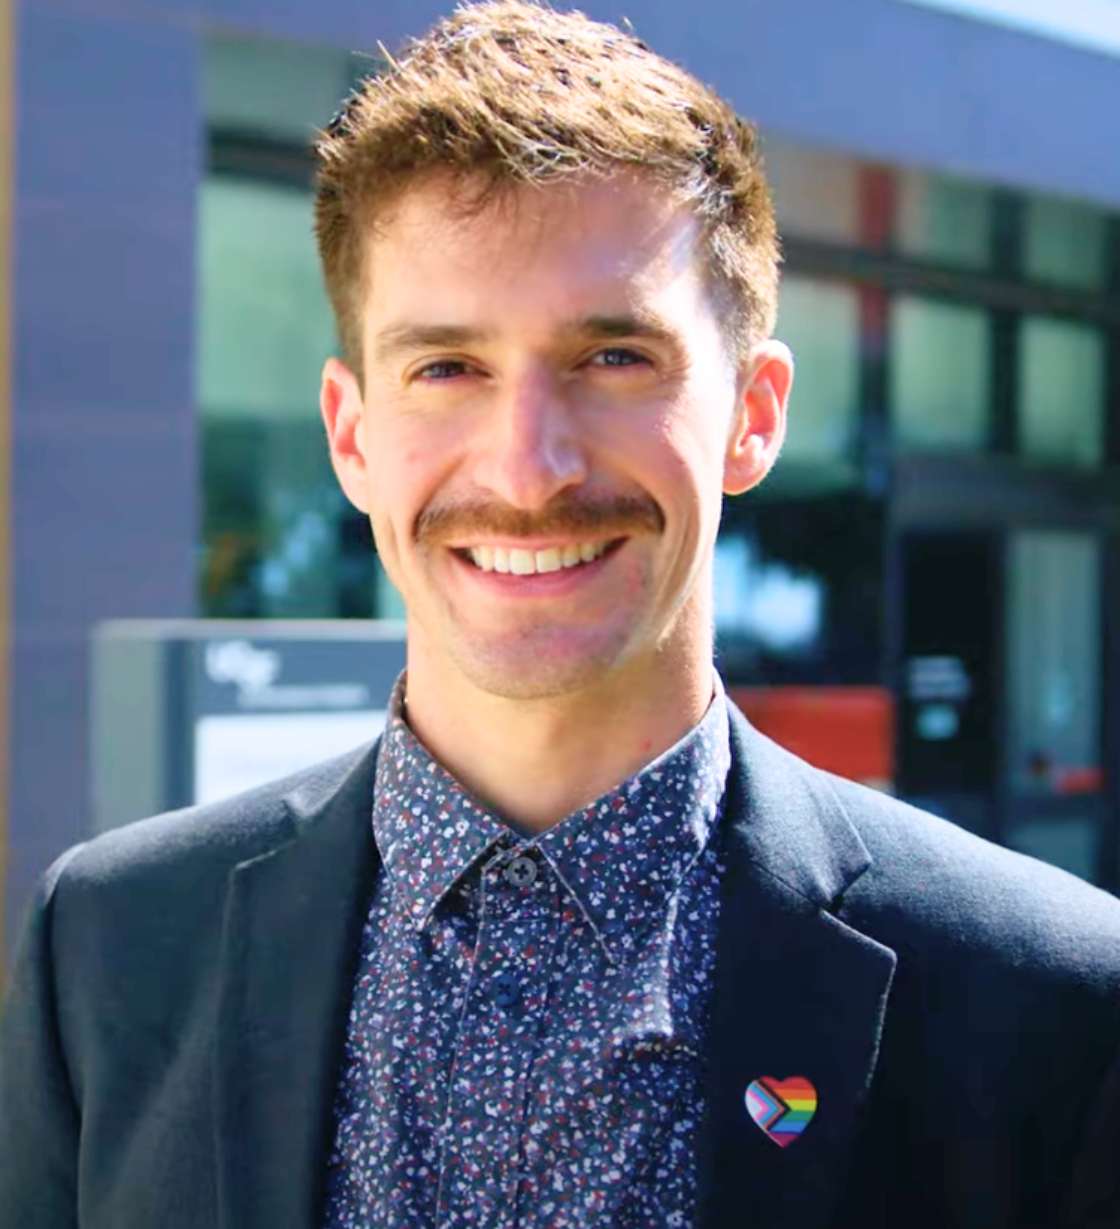 Kyle Lakatos poses wearing a queer pin